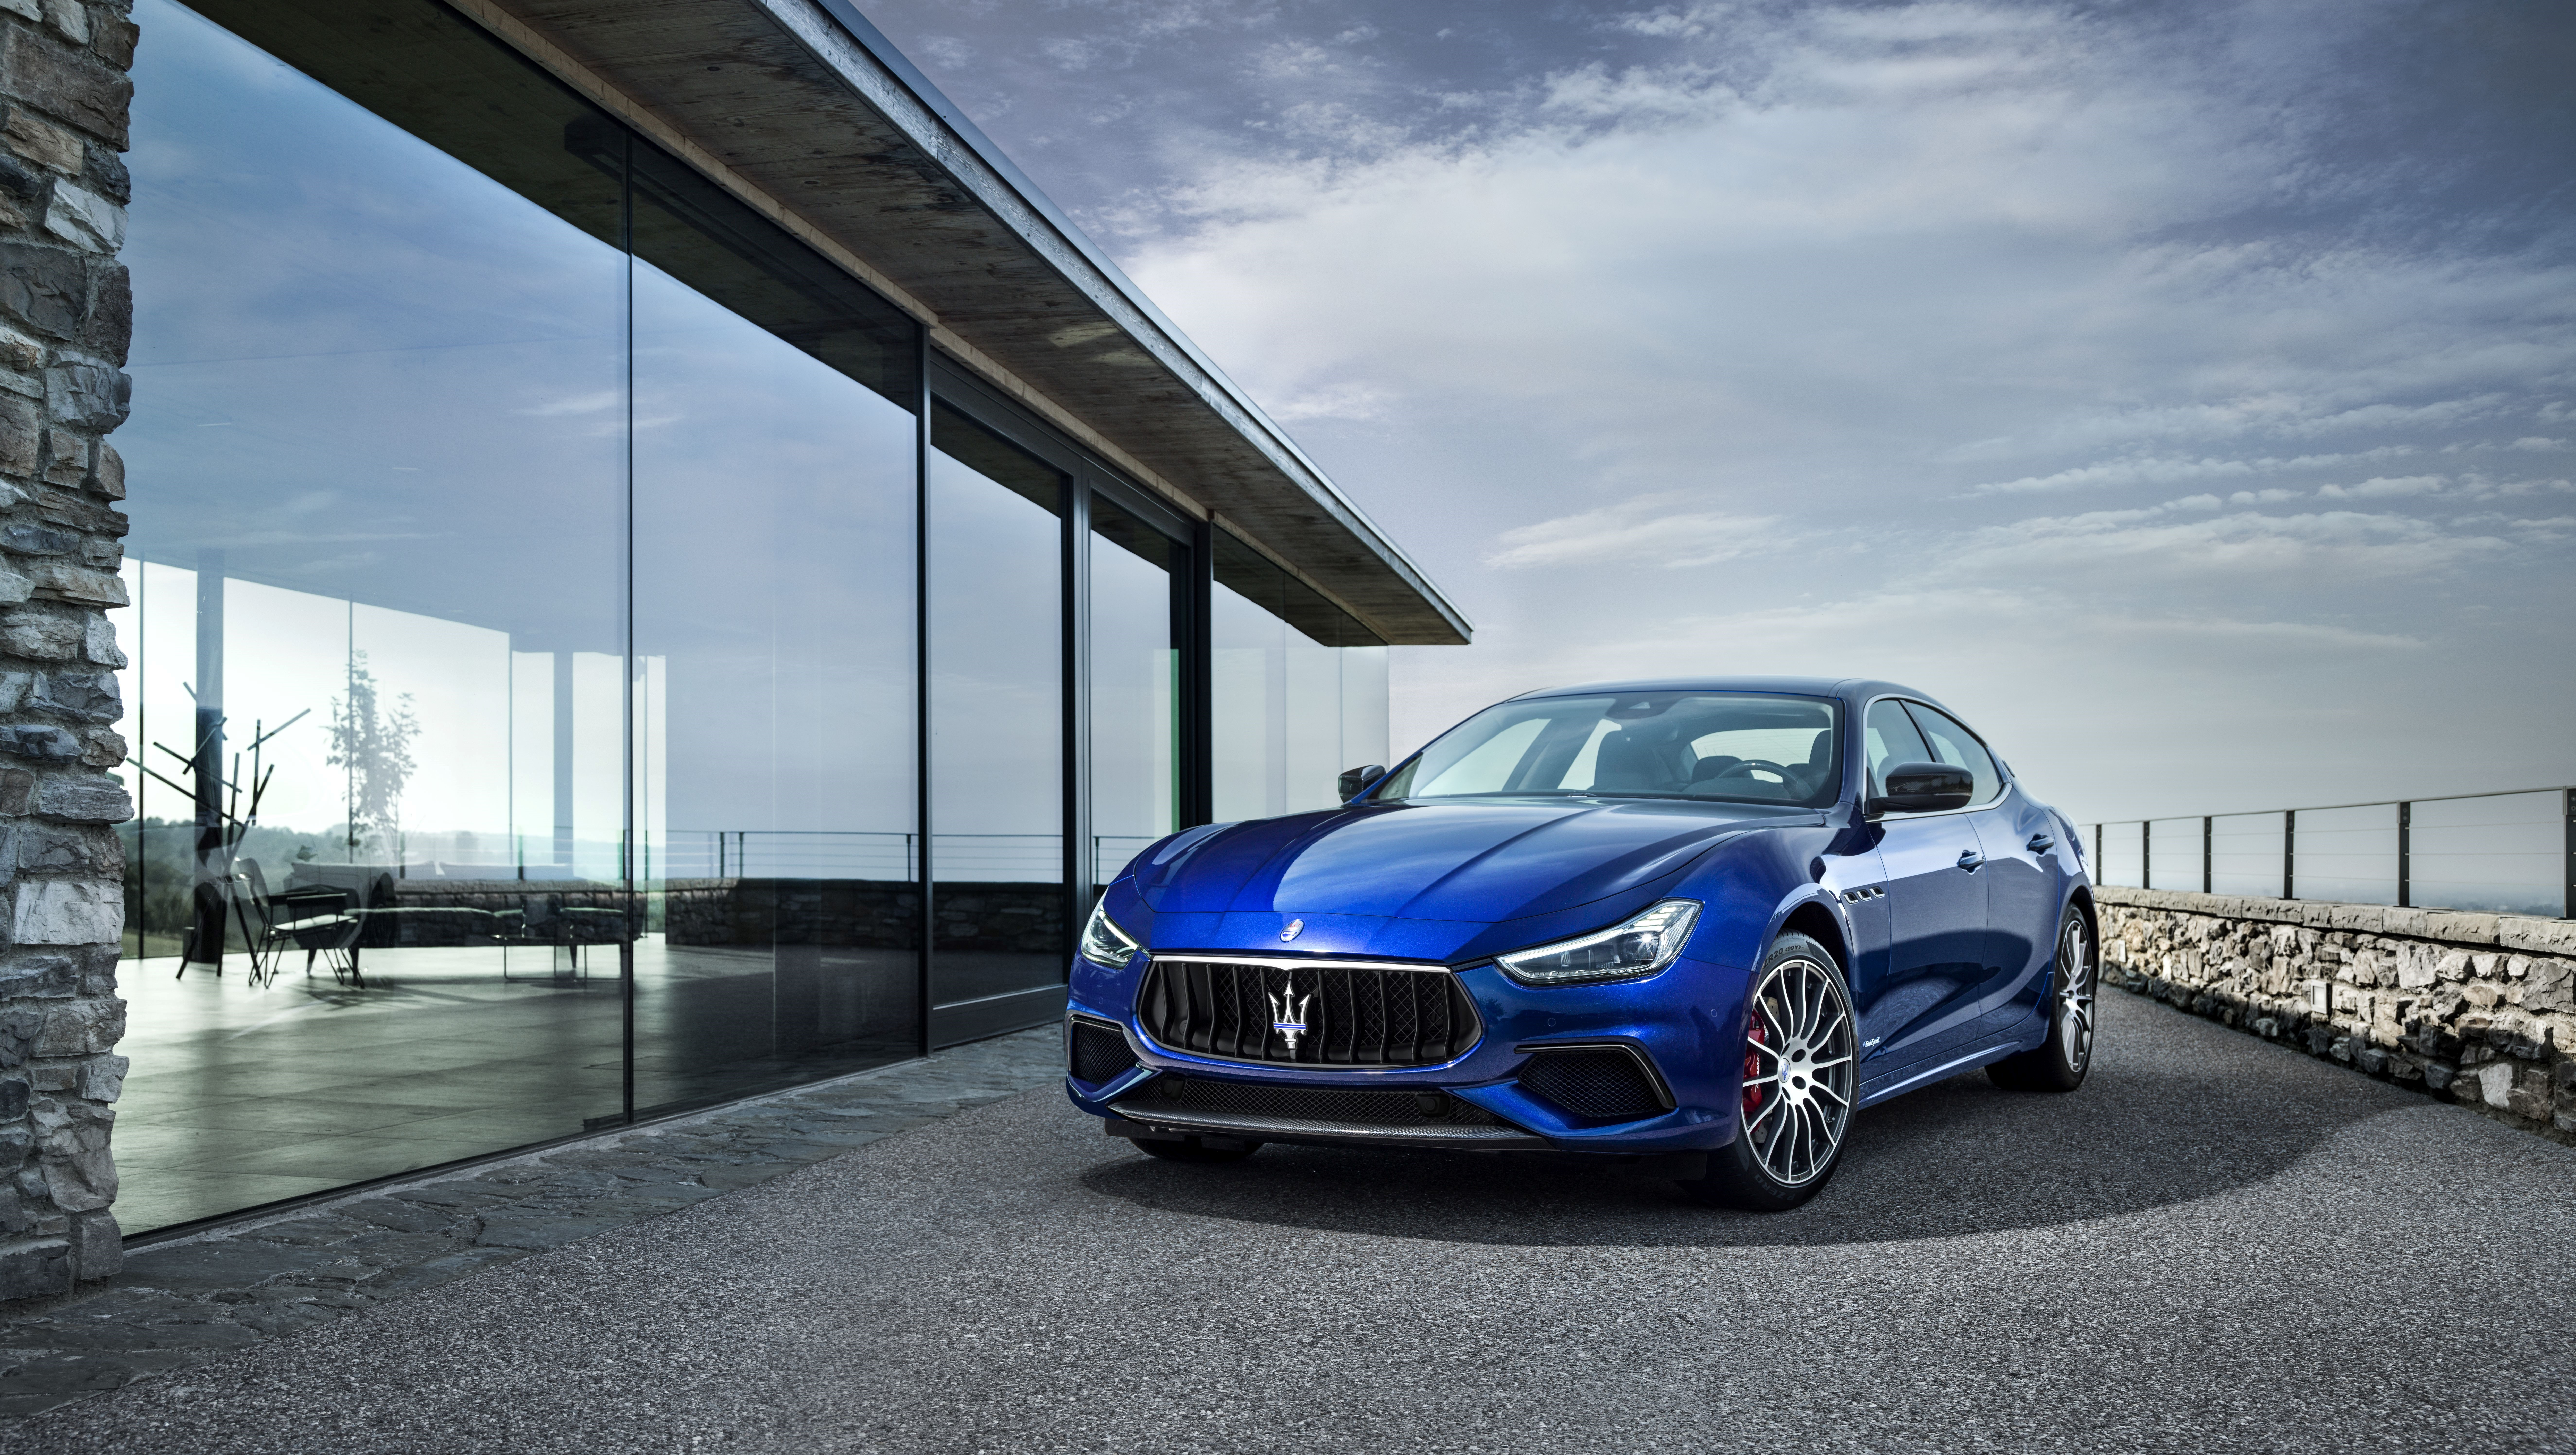 Maserati delivered to your home